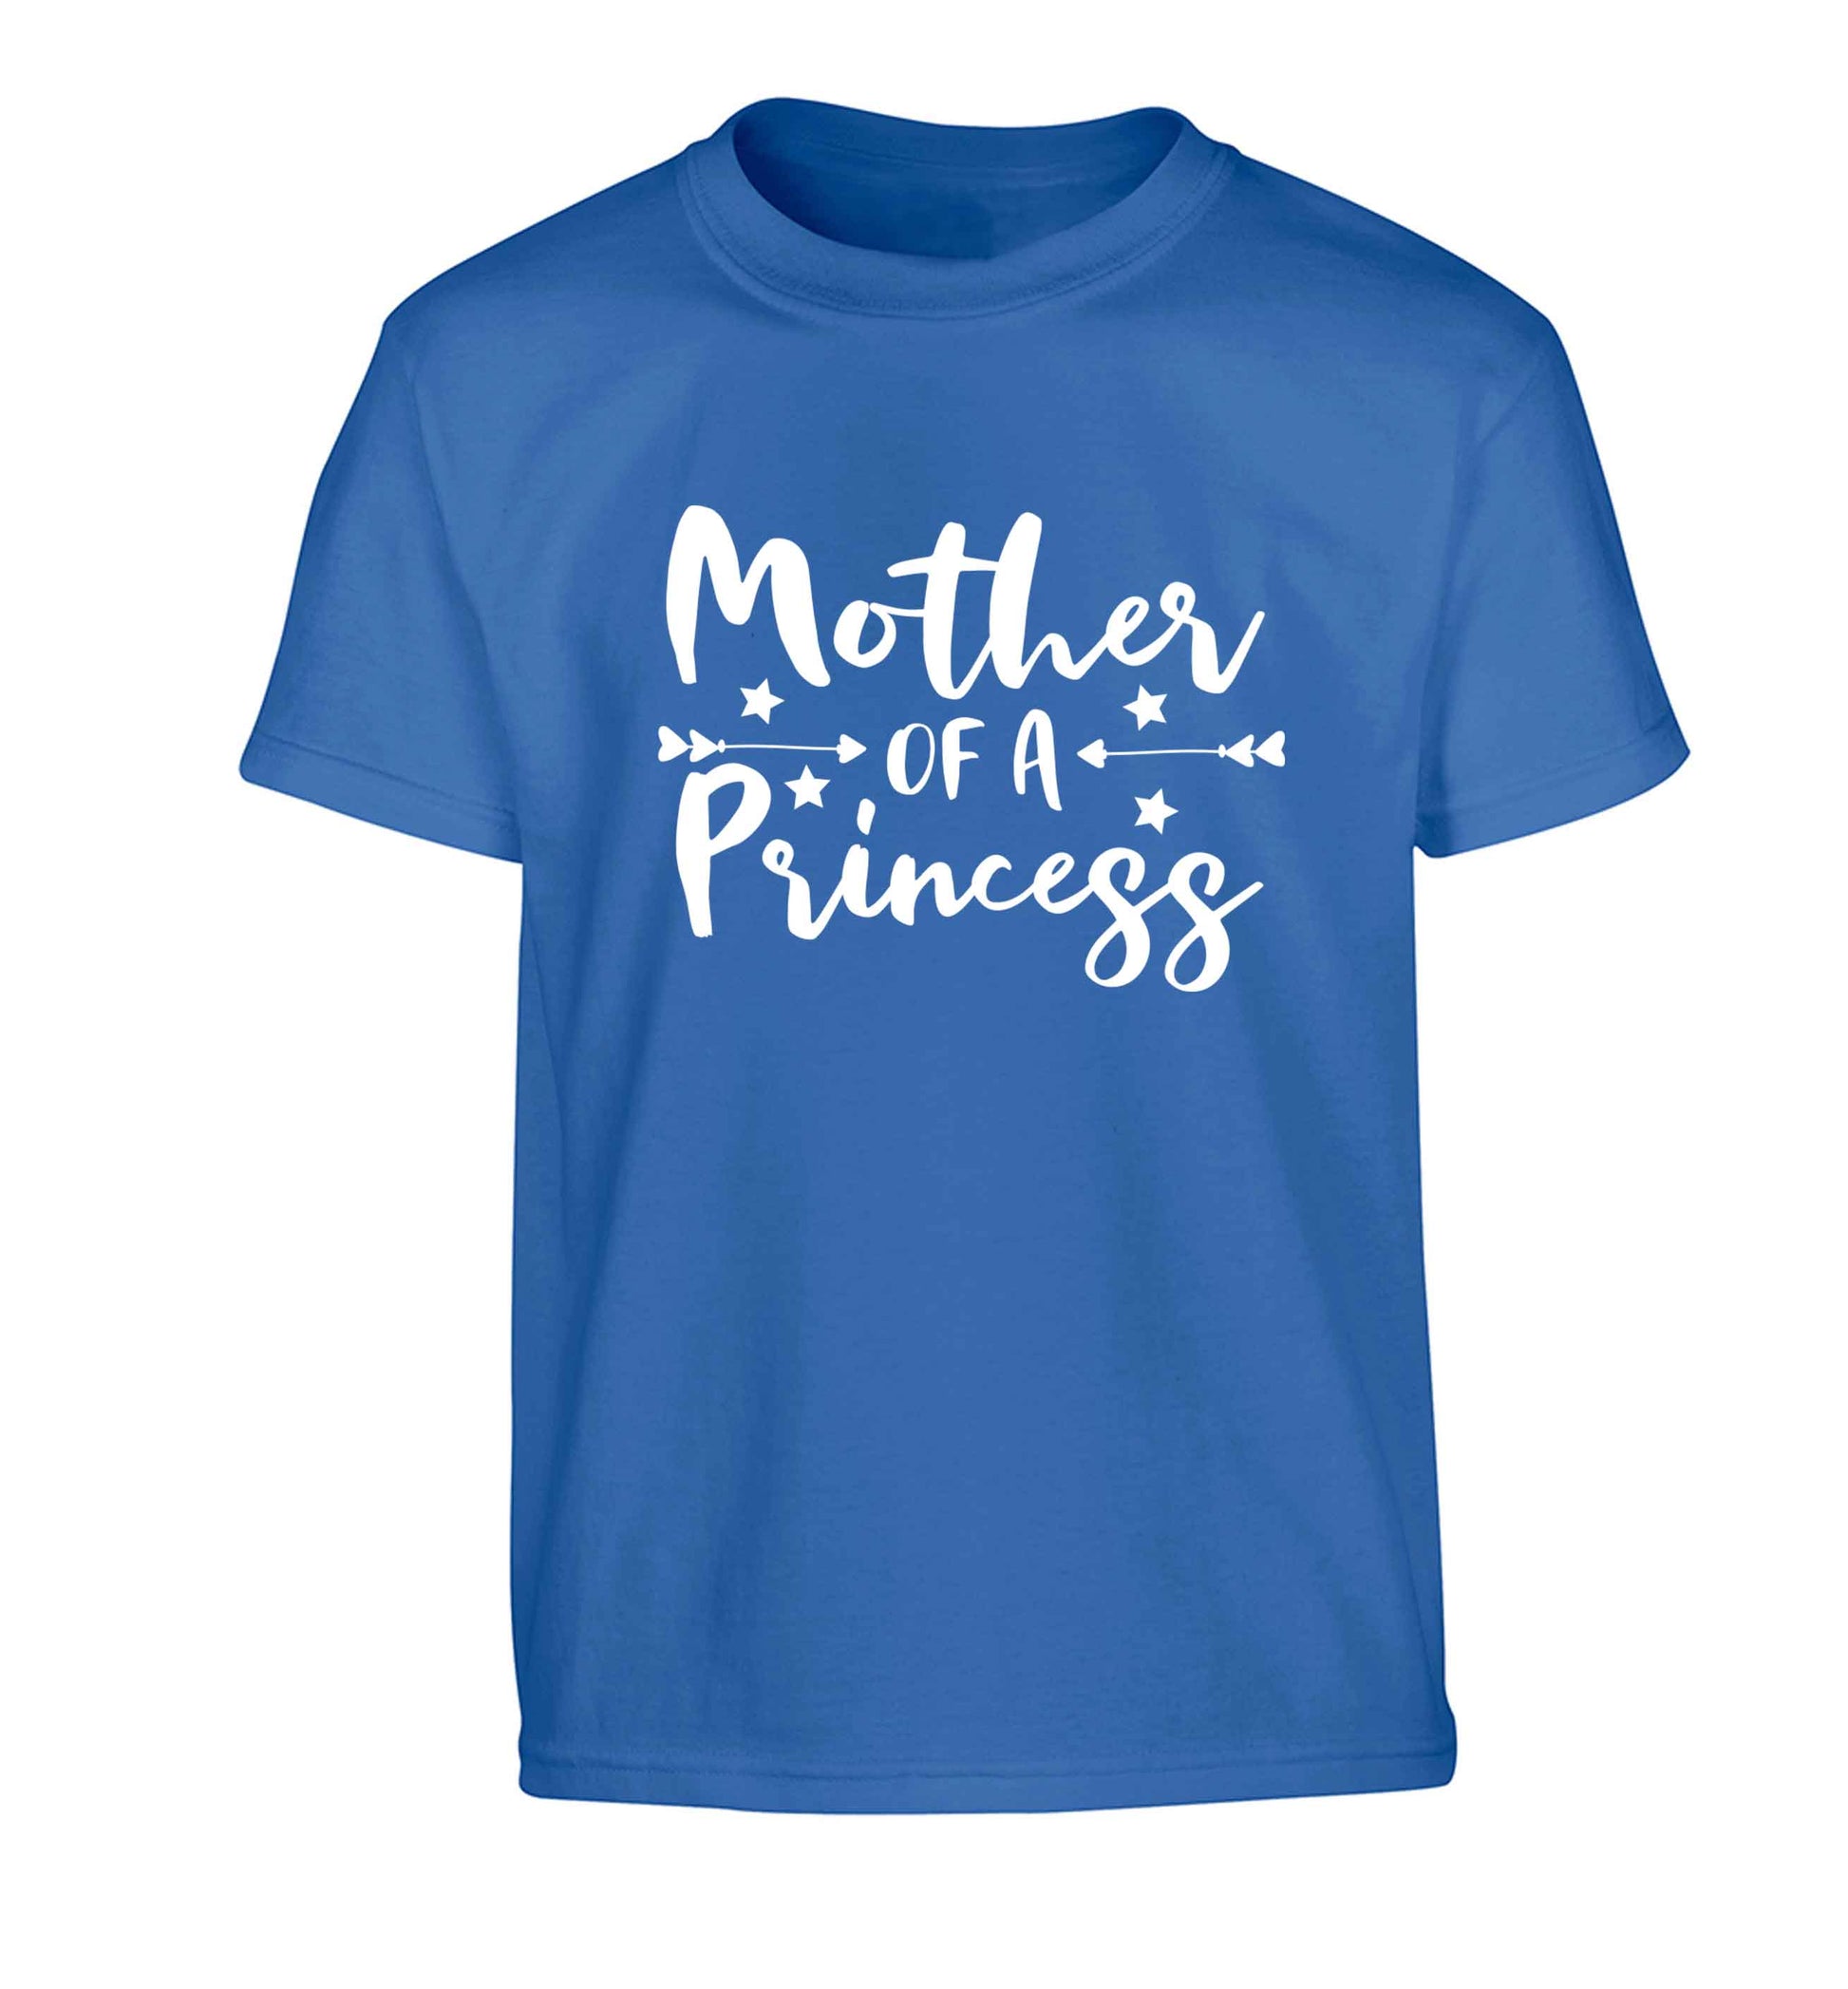 Mother of a princess Children's blue Tshirt 12-13 Years